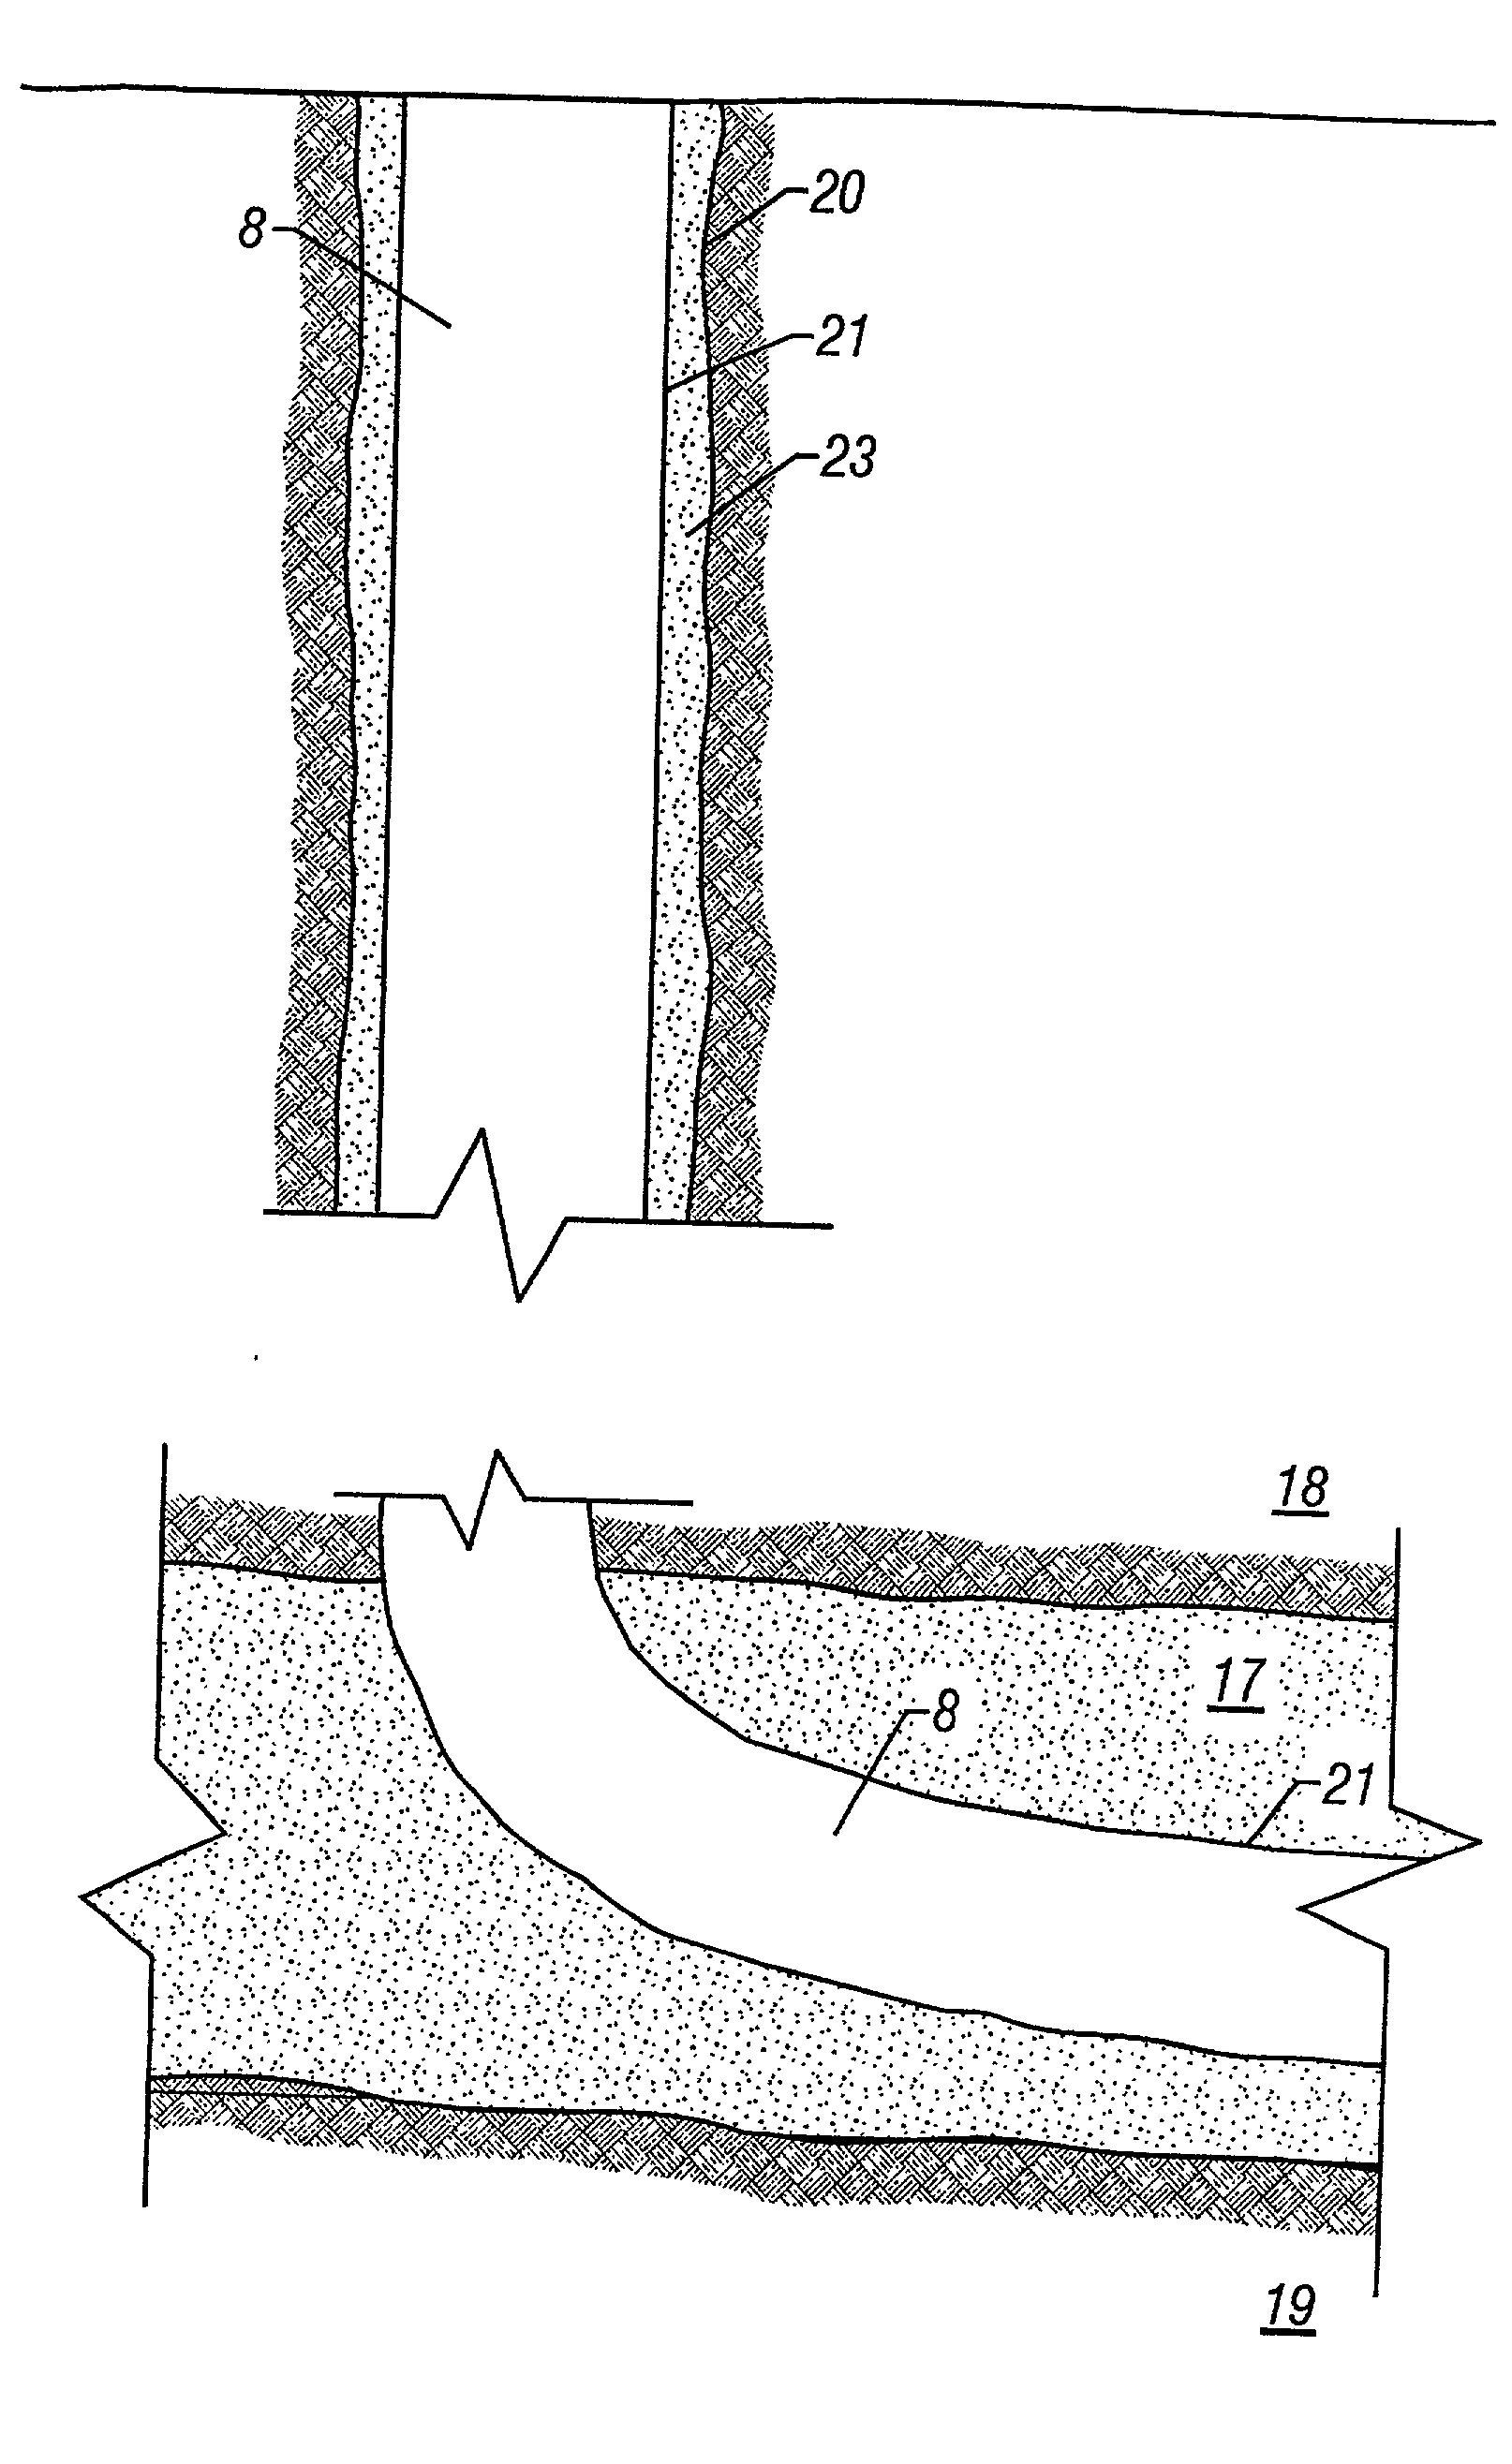 Method of predicting the on-set of formation solid production in high-rate perforated and open hole gas wells